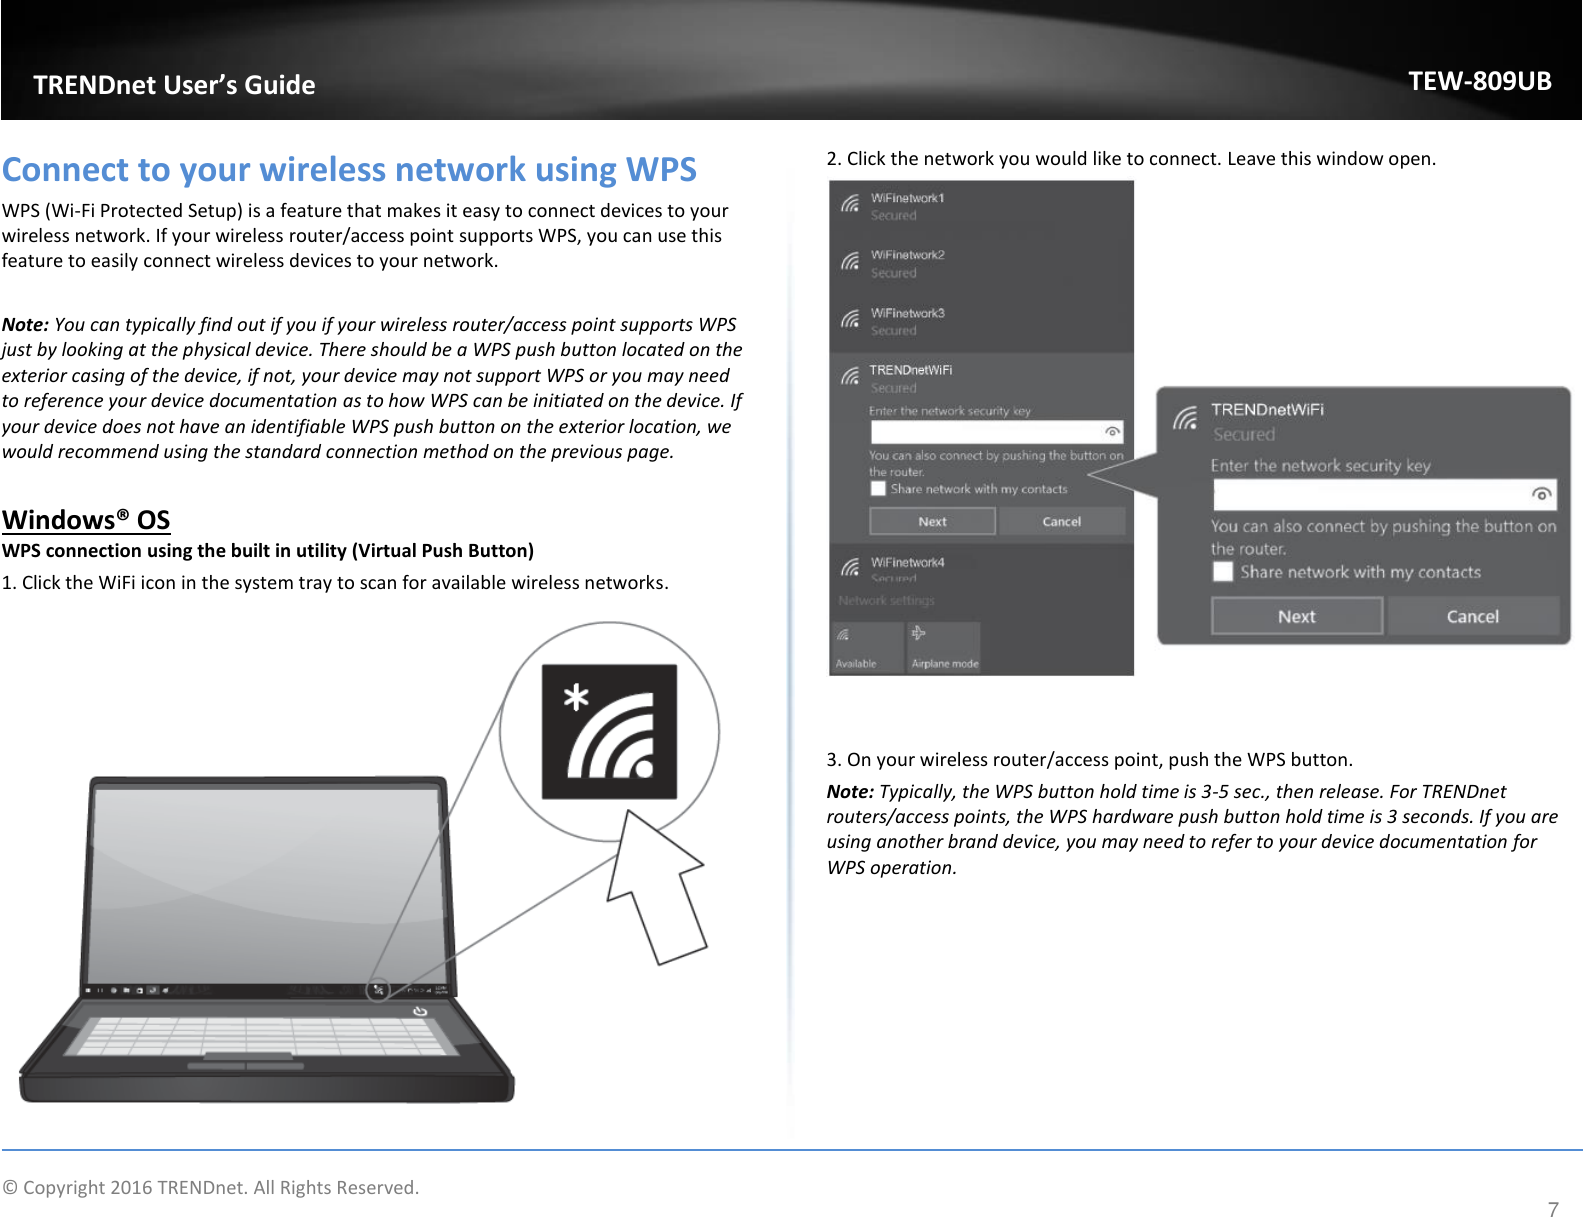                    © Copyright 2016 TRENDnet. All Rights Reserved.       TRENDnet User’s Guide TEW-809UB 7 Connect to your wireless network using WPS WPS (Wi-Fi Protected Setup) is a feature that makes it easy to connect devices to your wireless network. If your wireless router/access point supports WPS, you can use this feature to easily connect wireless devices to your network.   Note: You can typically find out if you if your wireless router/access point supports WPS just by looking at the physical device. There should be a WPS push button located on the exterior casing of the device, if not, your device may not support WPS or you may need to reference your device documentation as to how WPS can be initiated on the device. If your device does not have an identifiable WPS push button on the exterior location, we would recommend using the standard connection method on the previous page.  Windows® OS WPS connection using the built in utility (Virtual Push Button) 1. Click the WiFi icon in the system tray to scan for available wireless networks.   2. Click the network you would like to connect. Leave this window open.     3. On your wireless router/access point, push the WPS button.  Note: Typically, the WPS button hold time is 3-5 sec., then release. For TRENDnet routers/access points, the WPS hardware push button hold time is 3 seconds. If you are using another brand device, you may need to refer to your device documentation for WPS operation.  